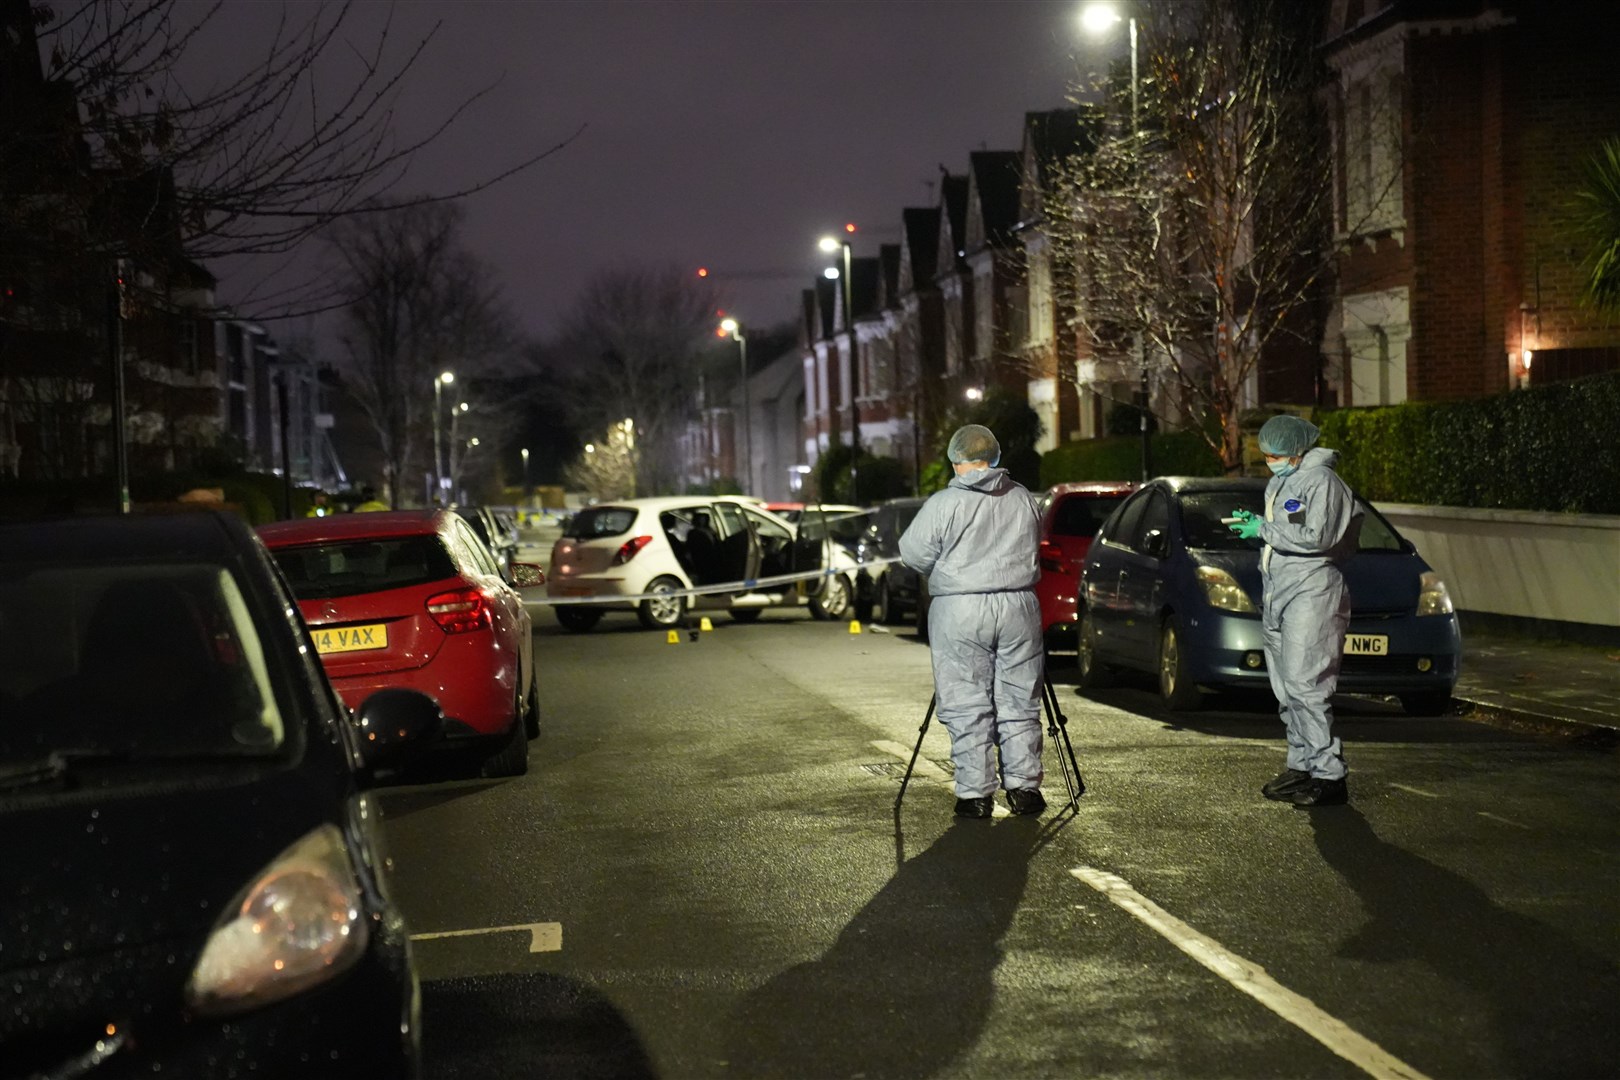 Police at the scene in Lessar Avenue near Clapham Common, south London (James Weech/PA)